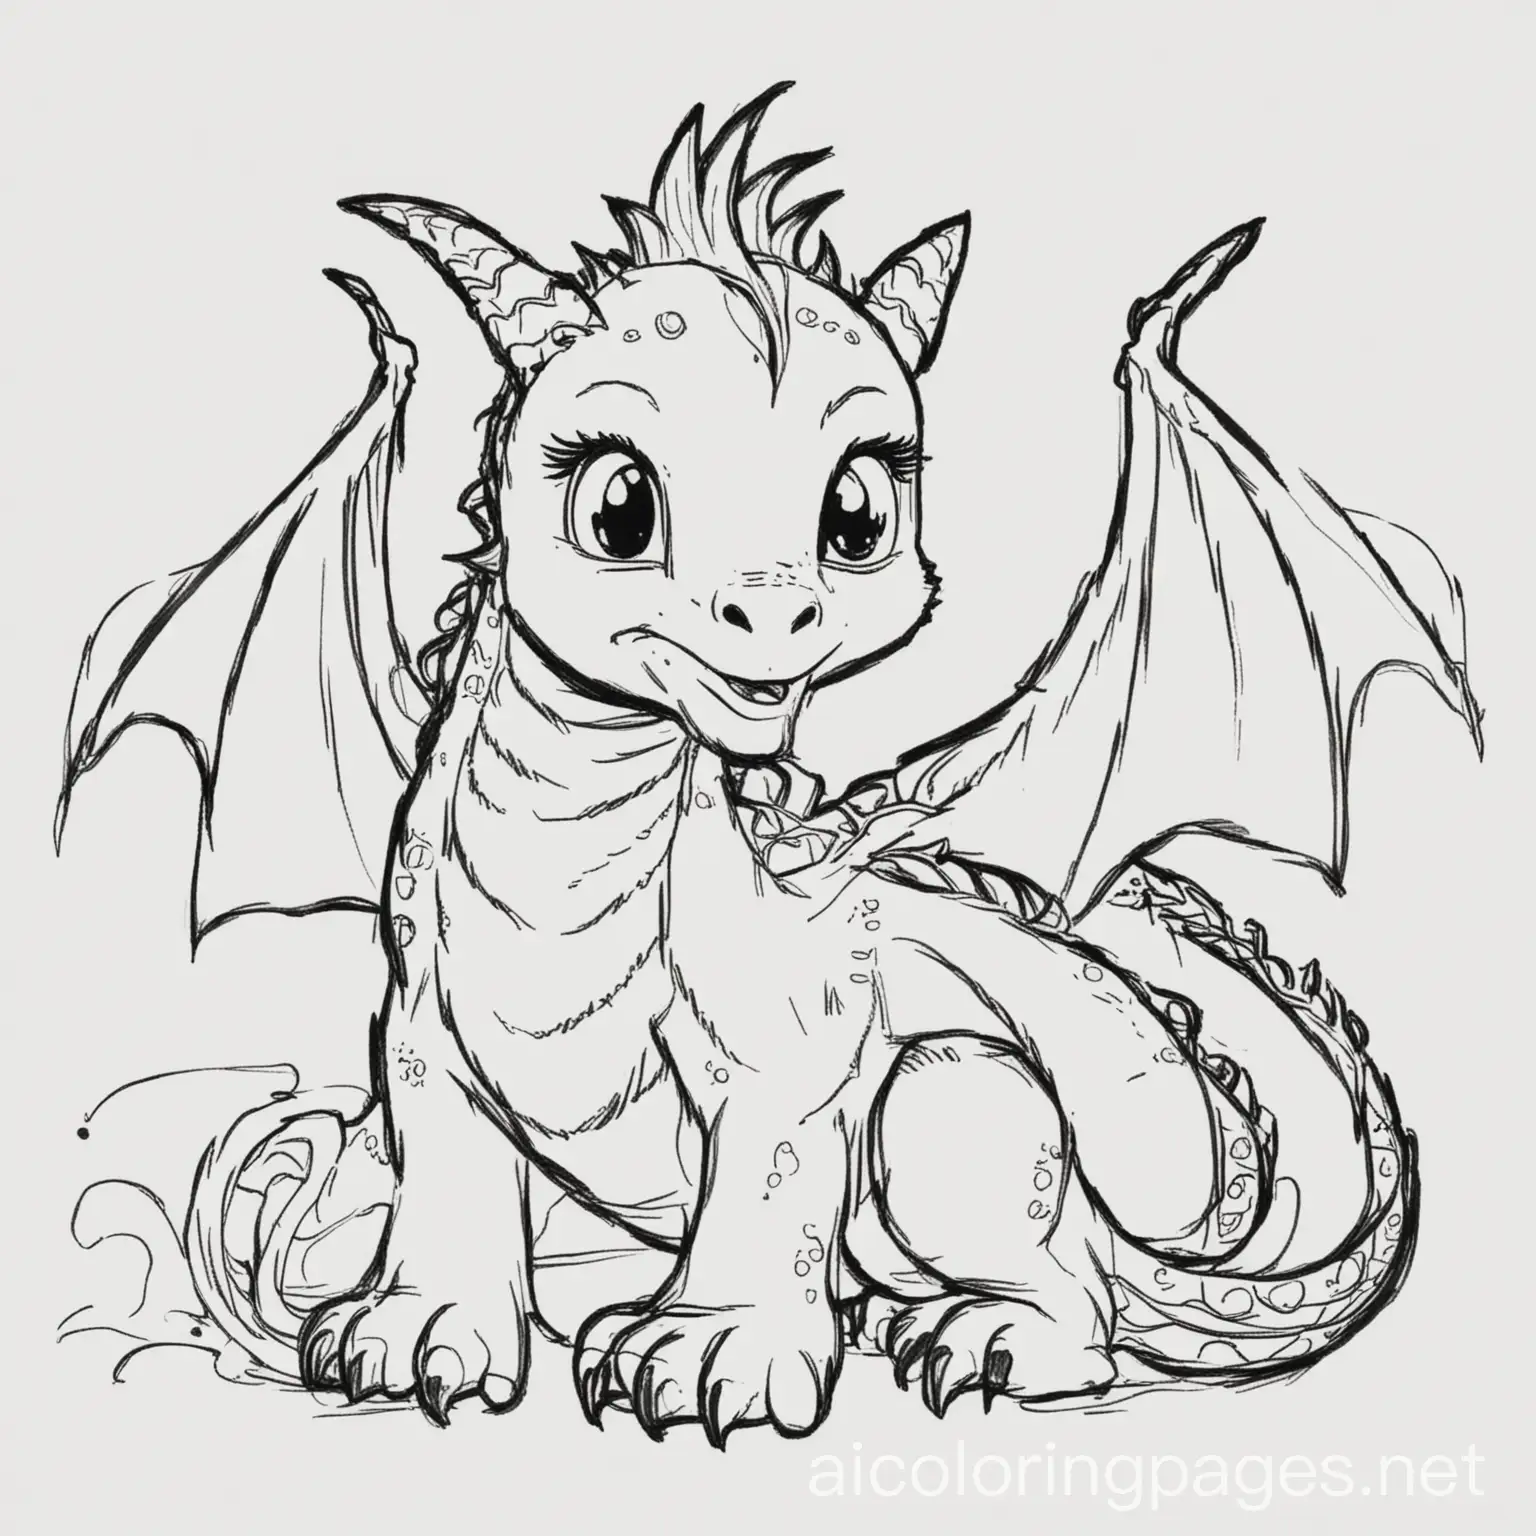 dragon, Coloring Page, black and white, line art, white background, Simplicity, Ample White Space, Coloring Page, black and white, line art, white background, Simplicity, Ample White Space. The background of the coloring page is plain white to make it easy for young children to color within the lines. The outlines of all the subjects are easy to distinguish, making it simple for kids to color without too much difficulty